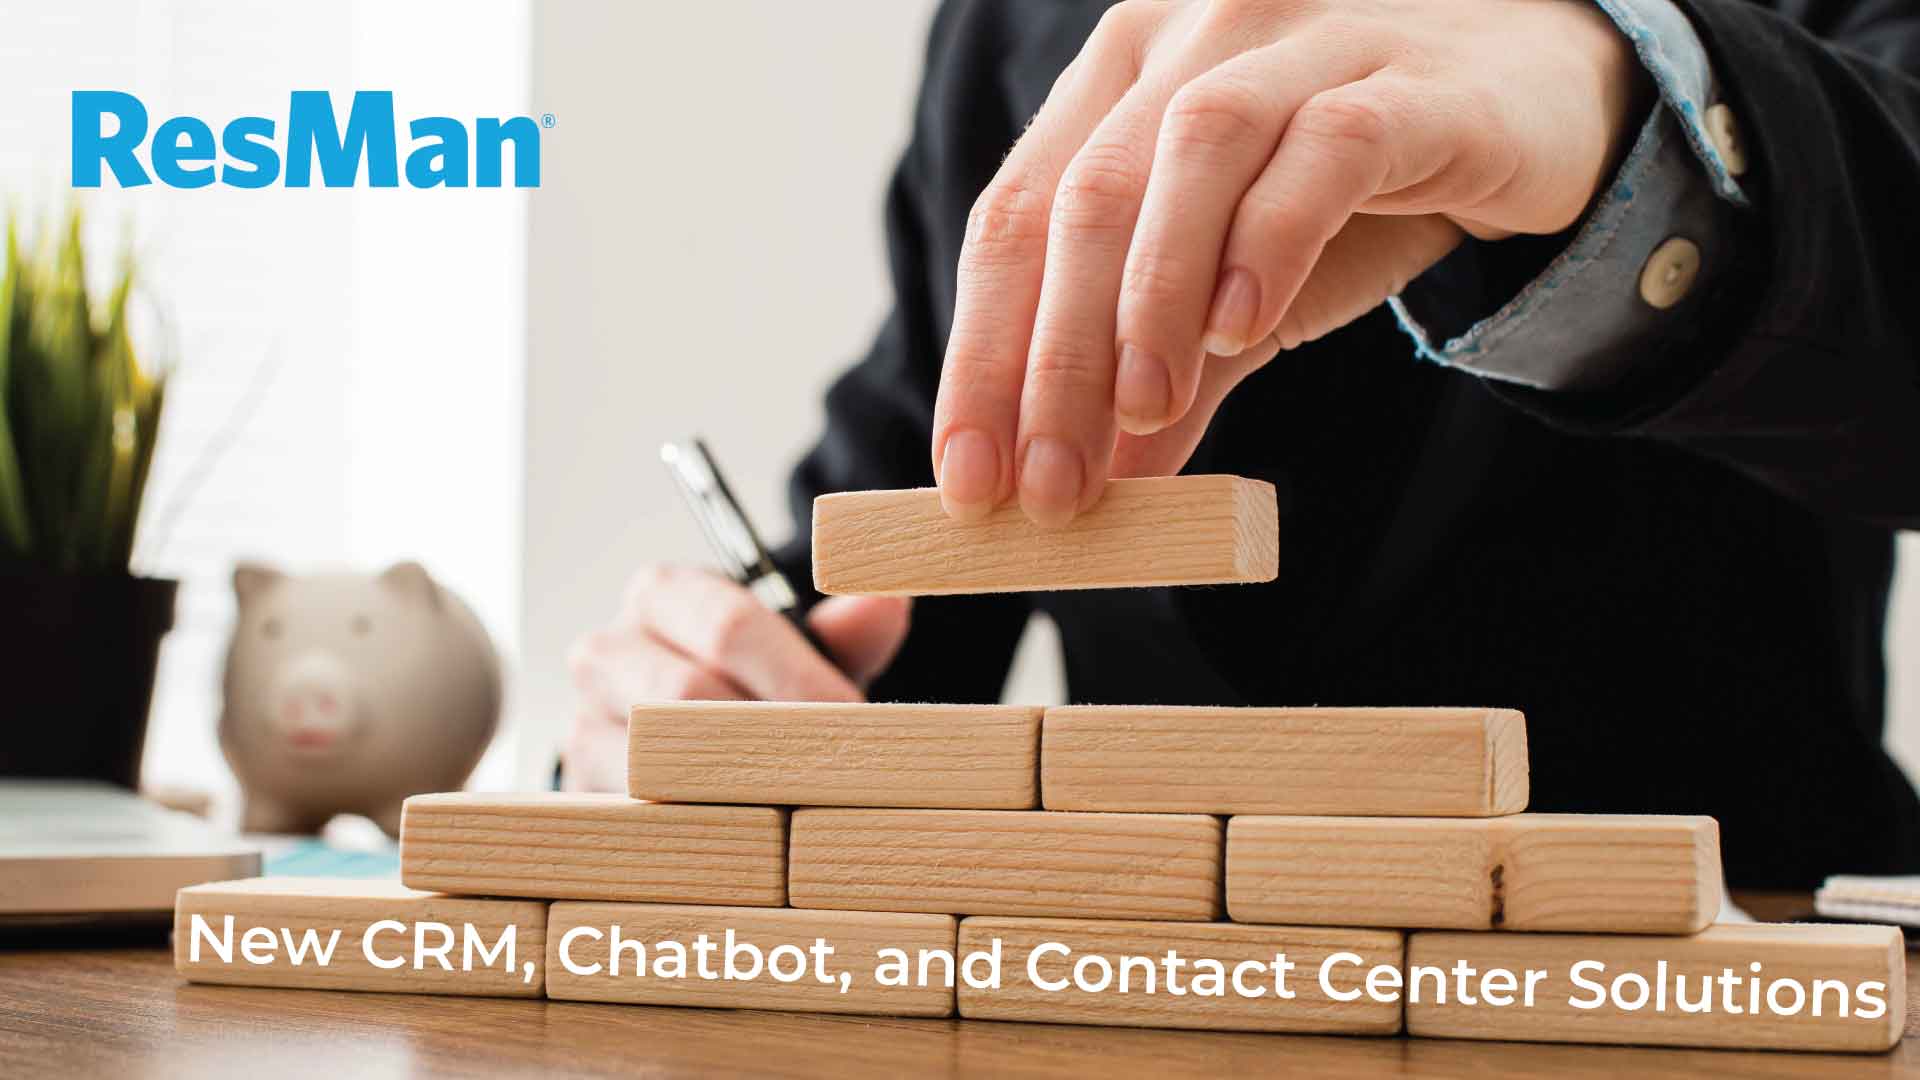 ResMan Expands Marketing Capabilities with New CRM, Chatbot, and Contact Center Solutions